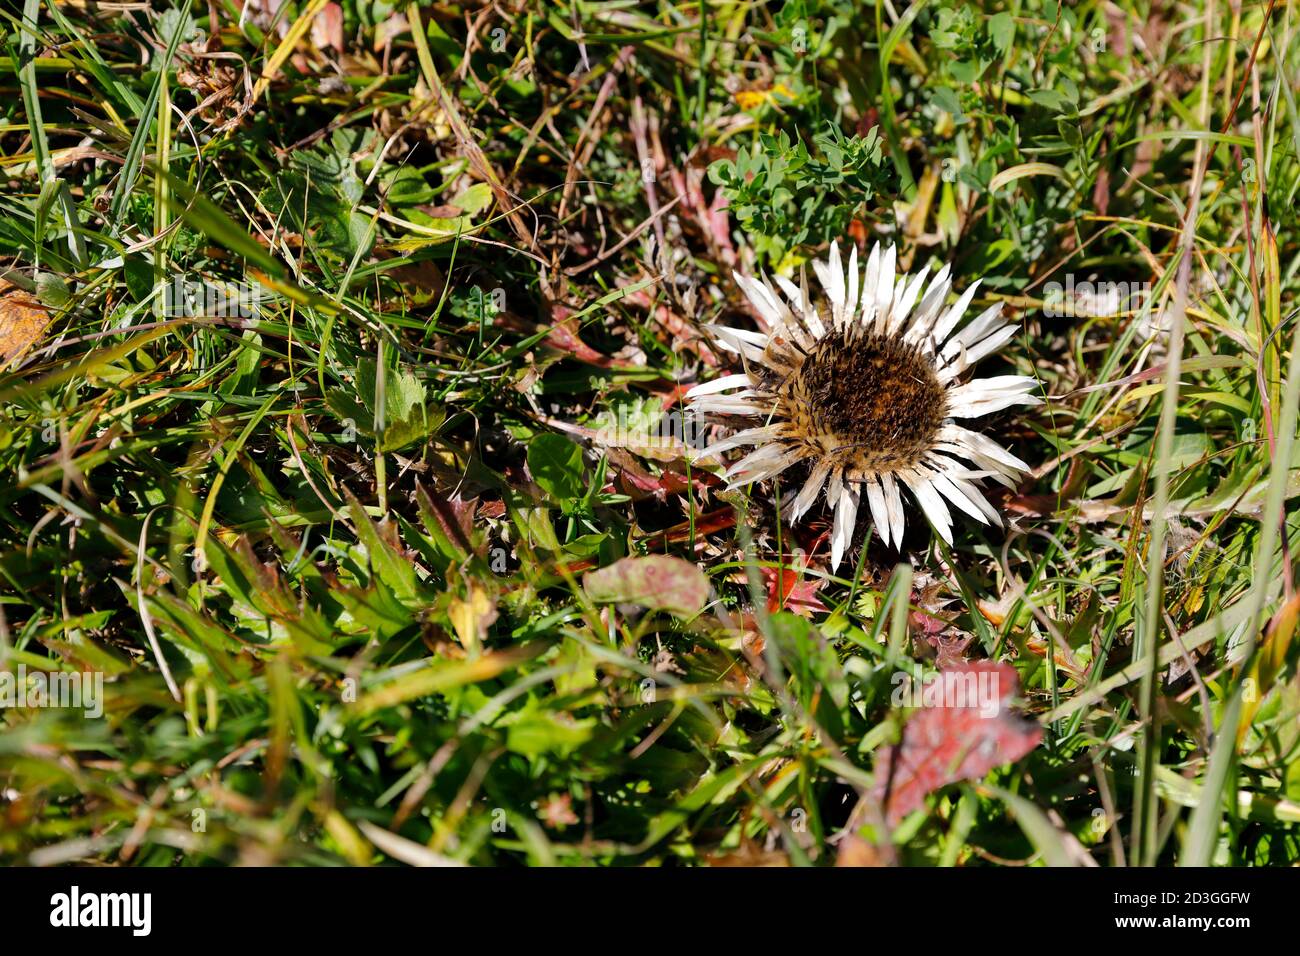 A silver thistle in the grass of a mountain, Styria Stock Photo